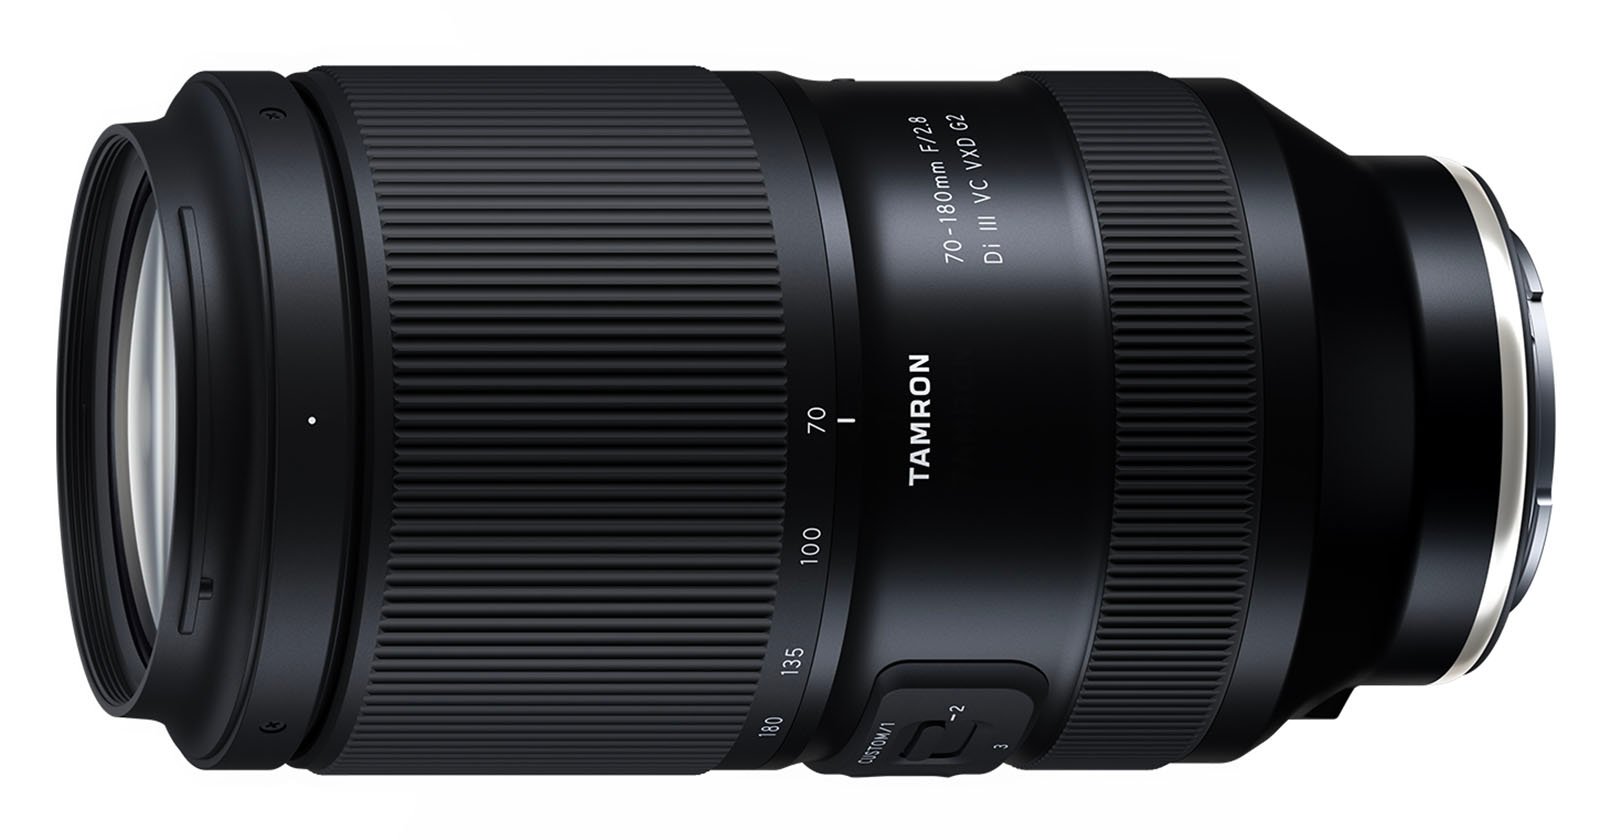  upgraded tamron 70-180mm lens launches next month 